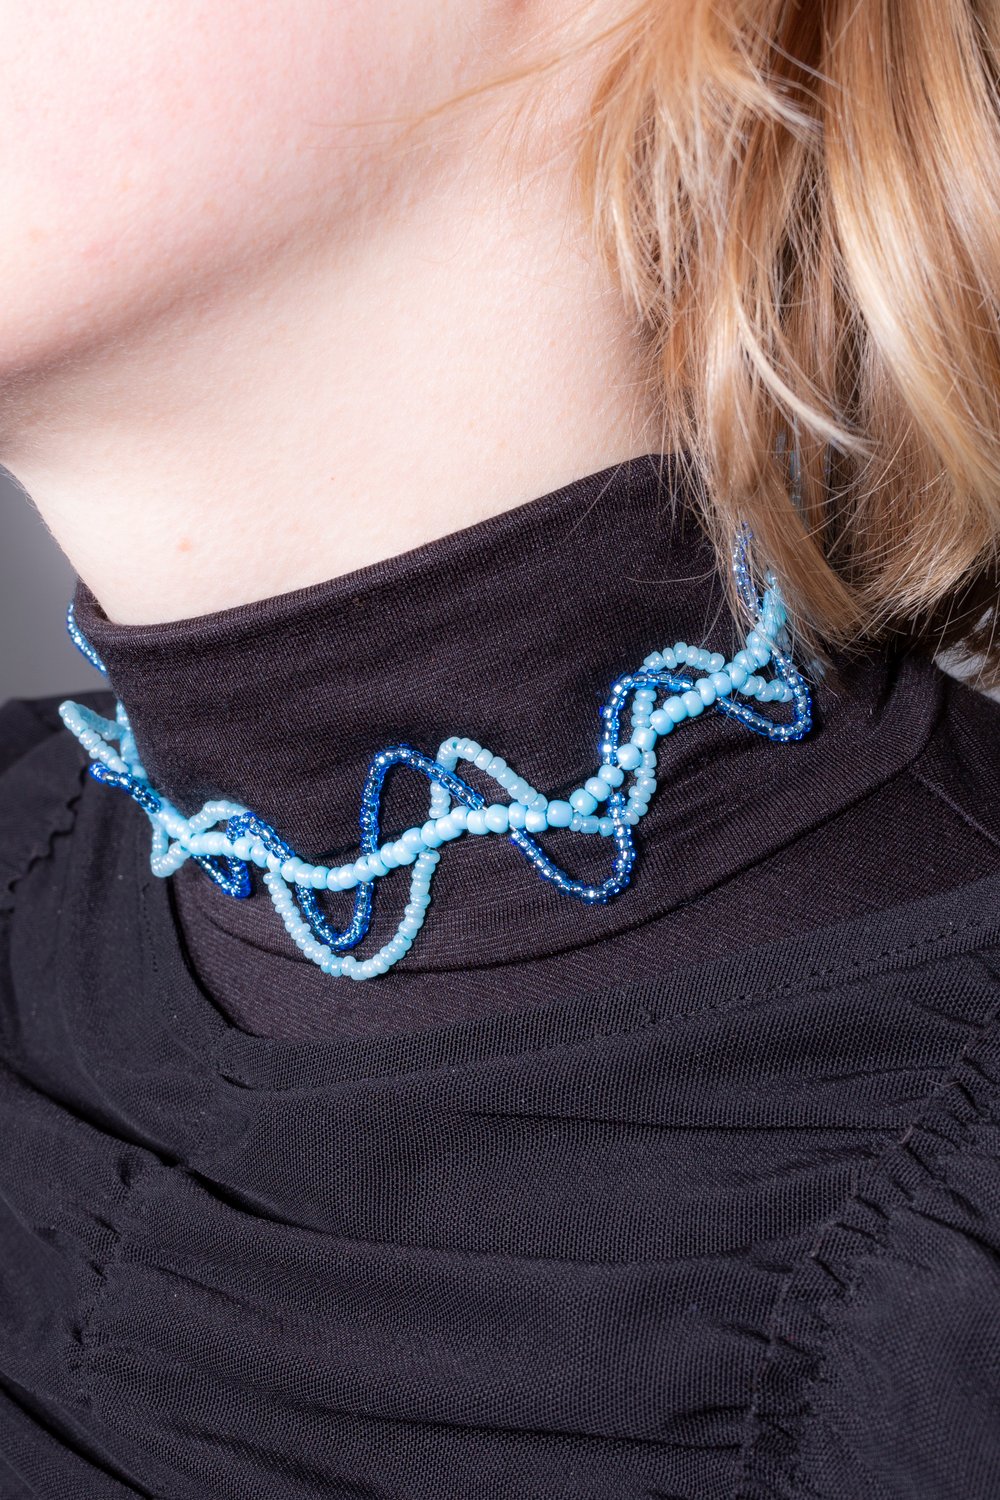 THE BLUE-CURLY-COLLAR NECKLACE